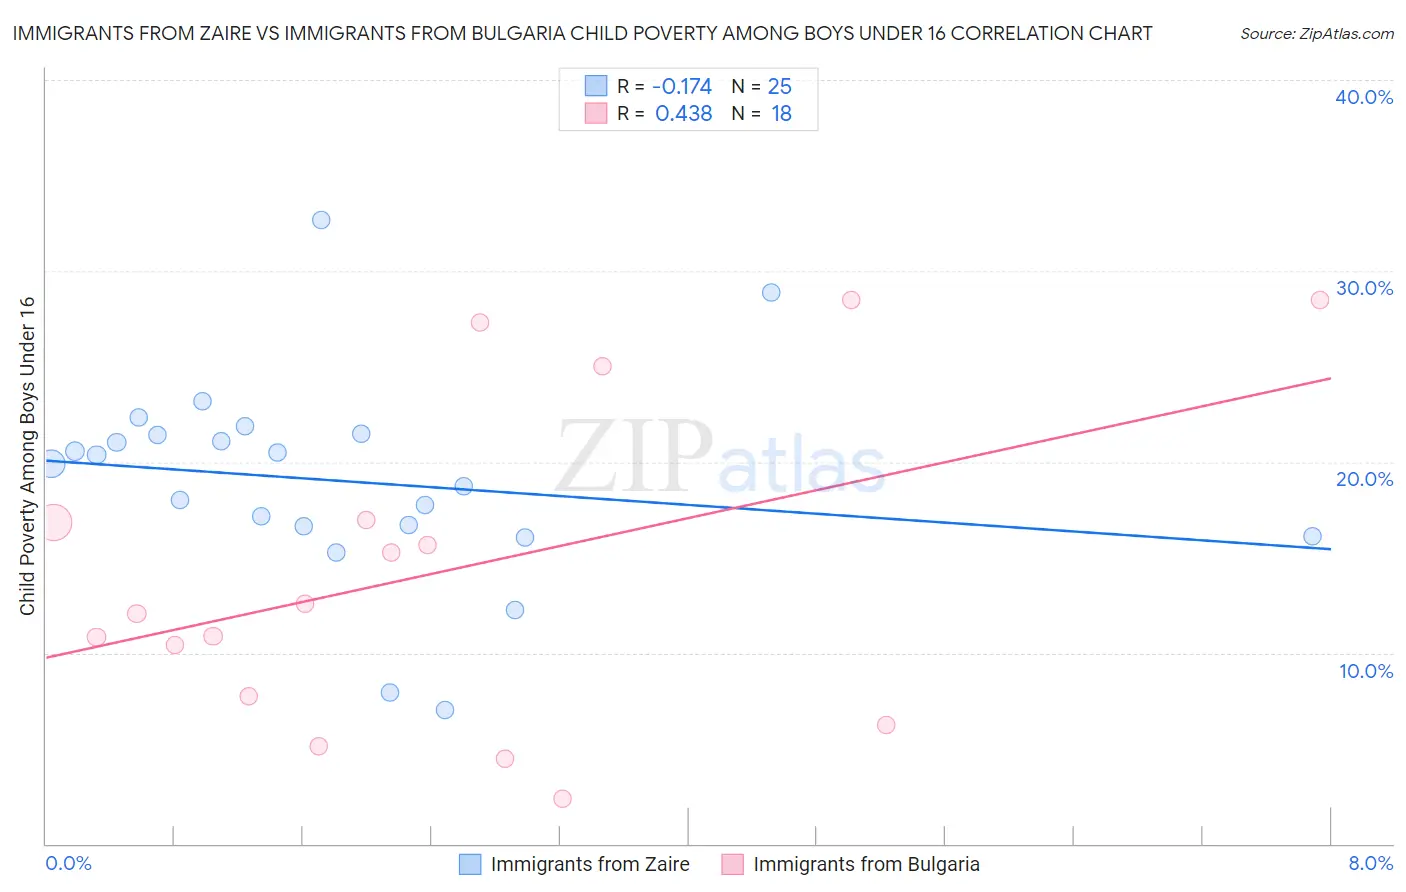 Immigrants from Zaire vs Immigrants from Bulgaria Child Poverty Among Boys Under 16